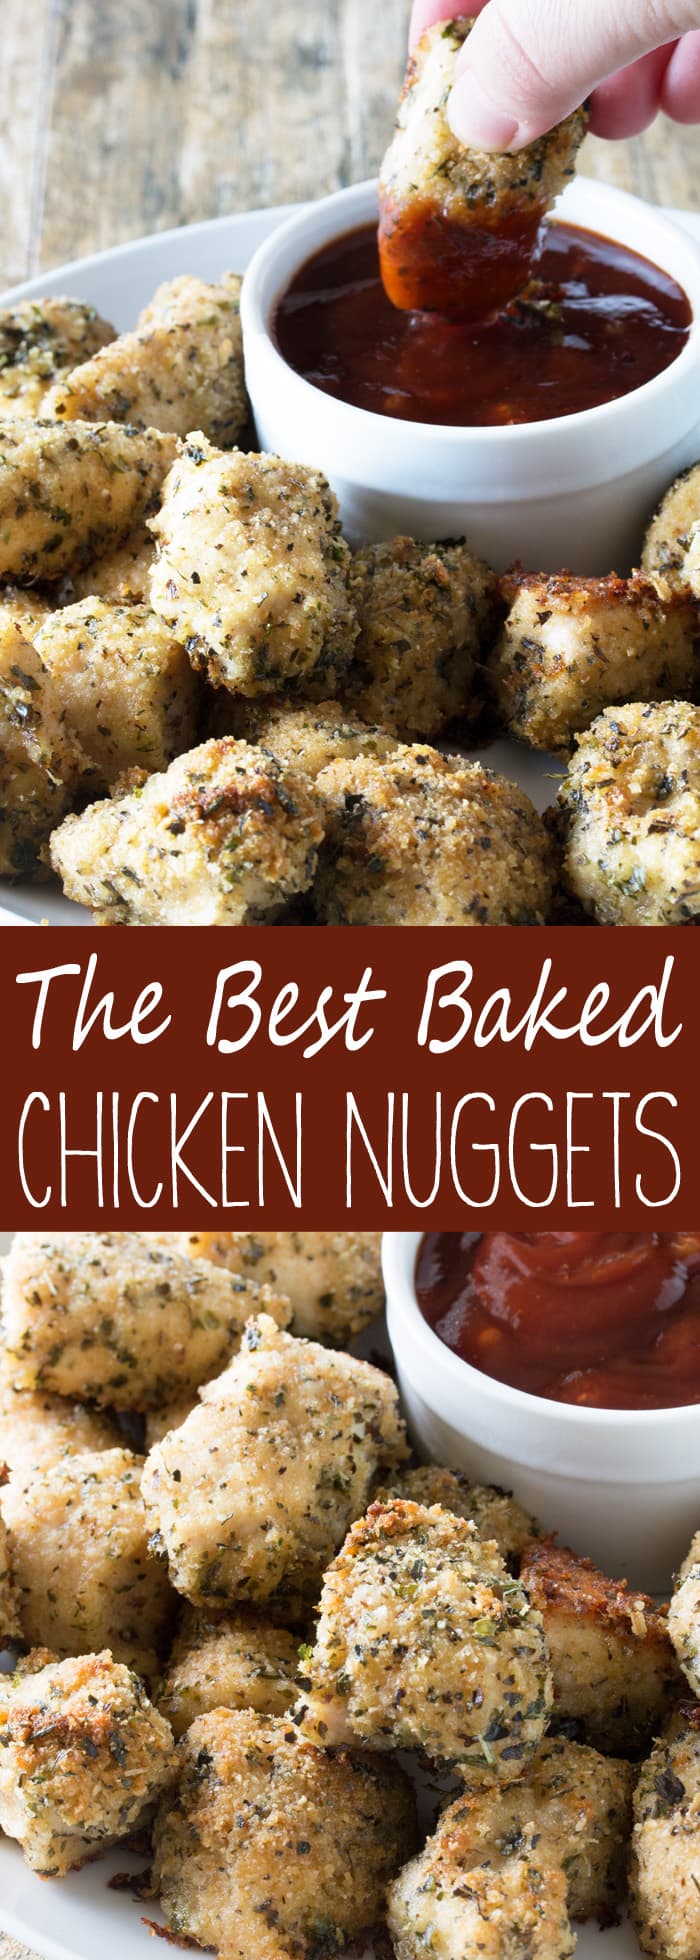 The Best Baked Chicken Nuggets